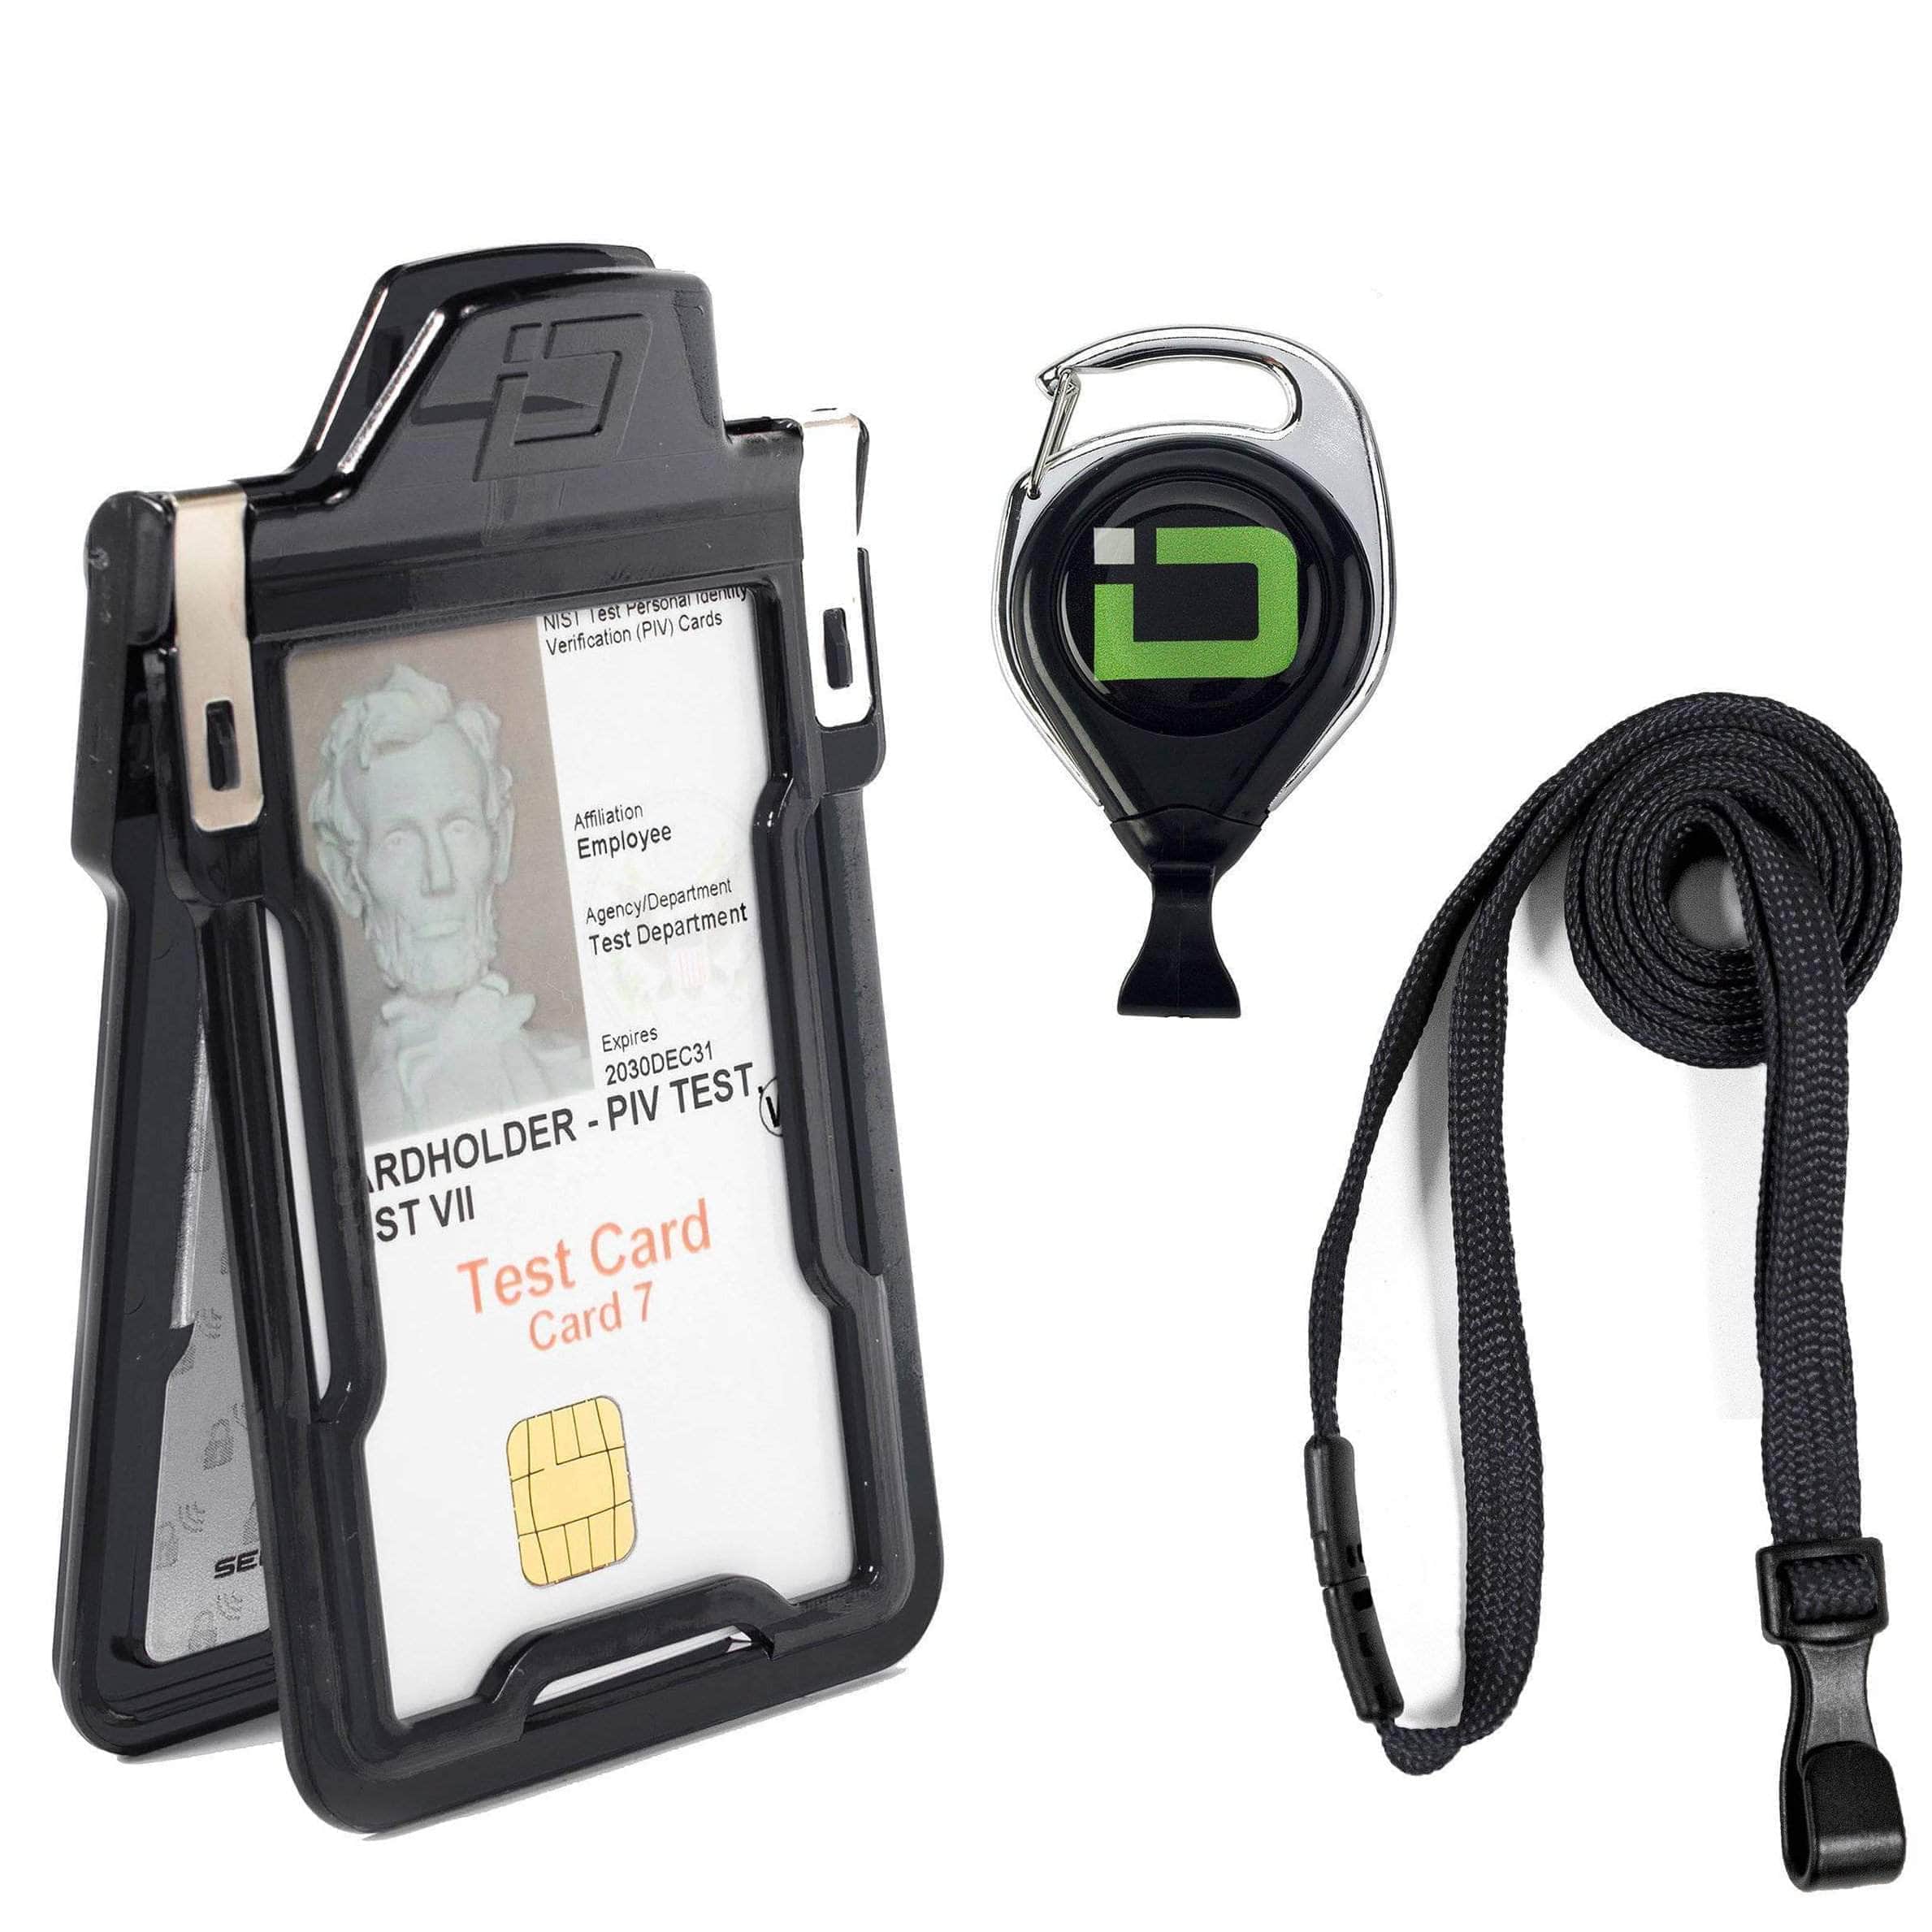 ID Stronghold Secure Badgeholder Classic 1 Card ID Badge Holder with Lanyard and Retractable Reel - RFID Blocking Badge Holder Made in The USA